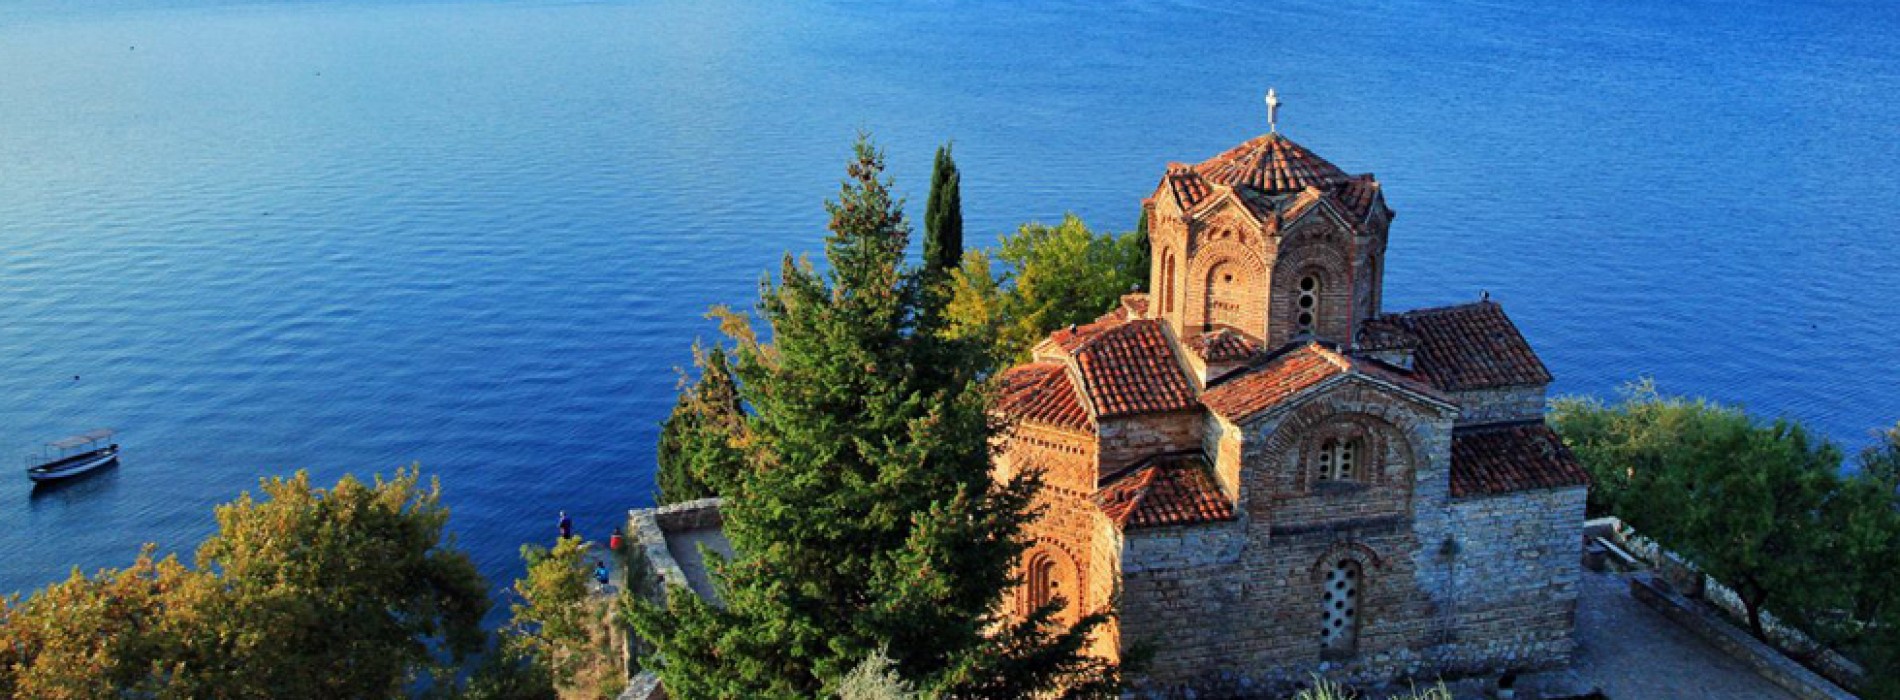 Macedonia: a country blessed with fascinating nature and history